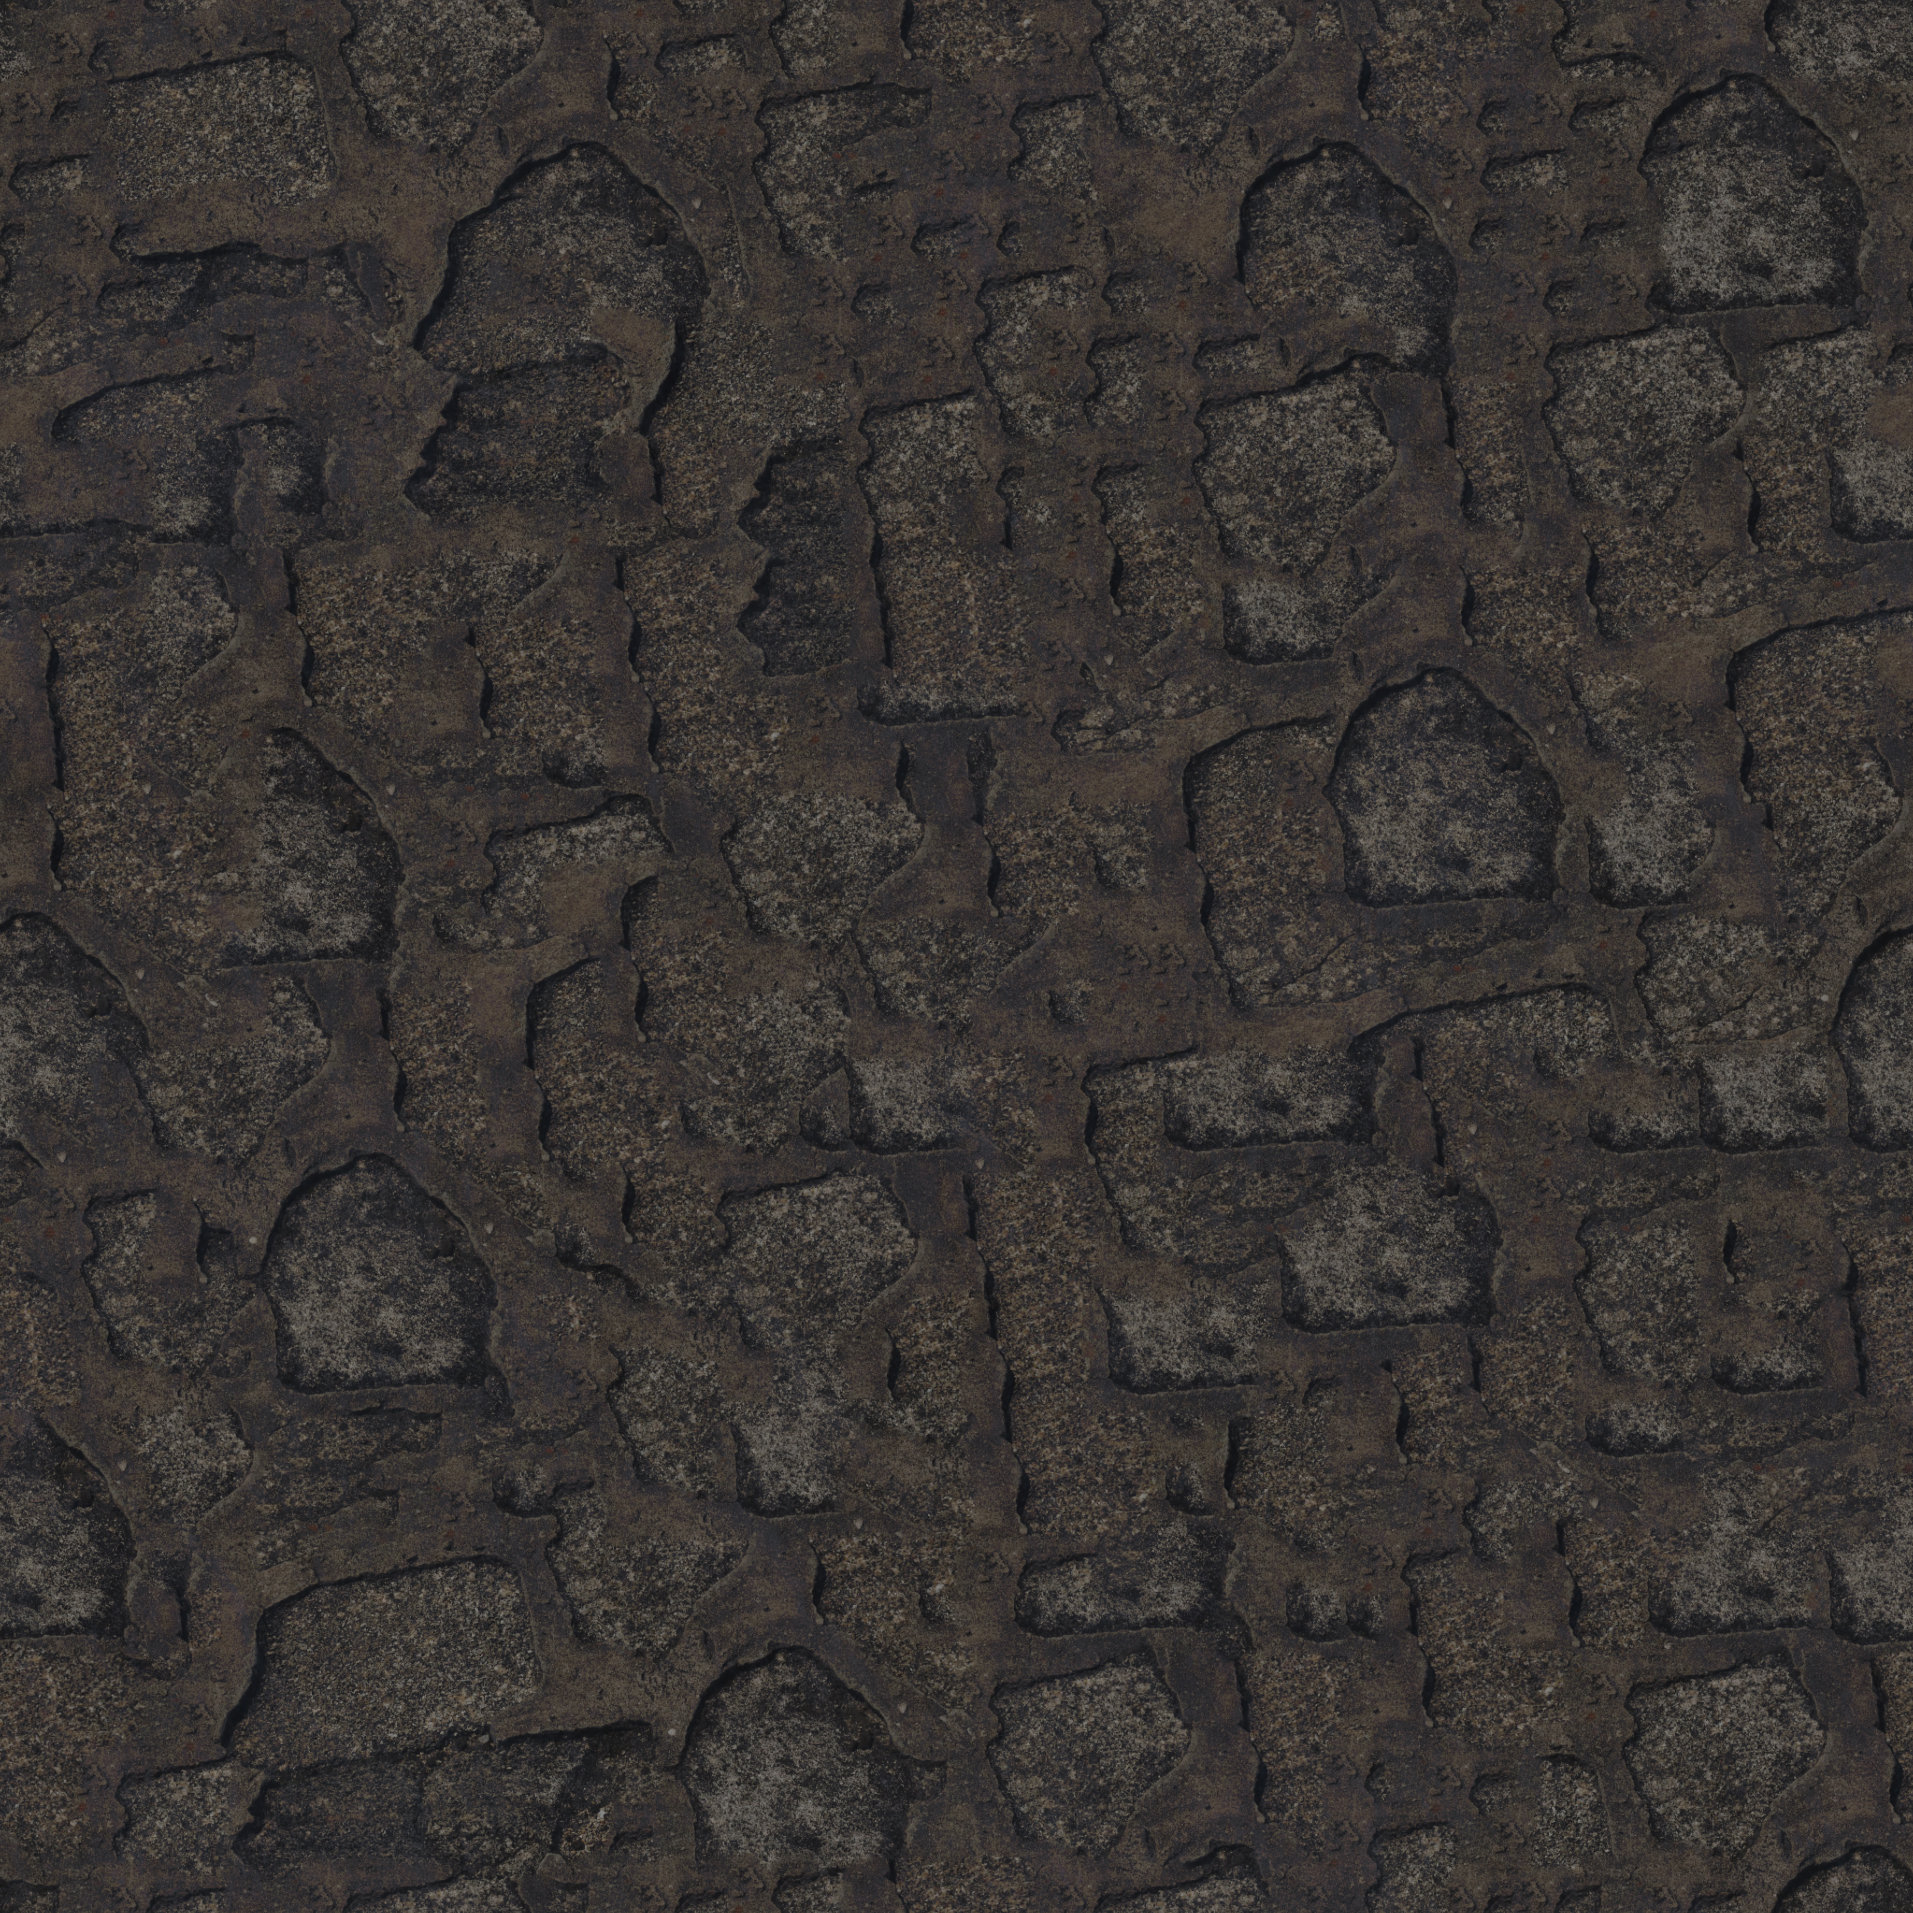 Fantasy Stone Texture_1-1-17d_Seamless | OpenGameArt.org